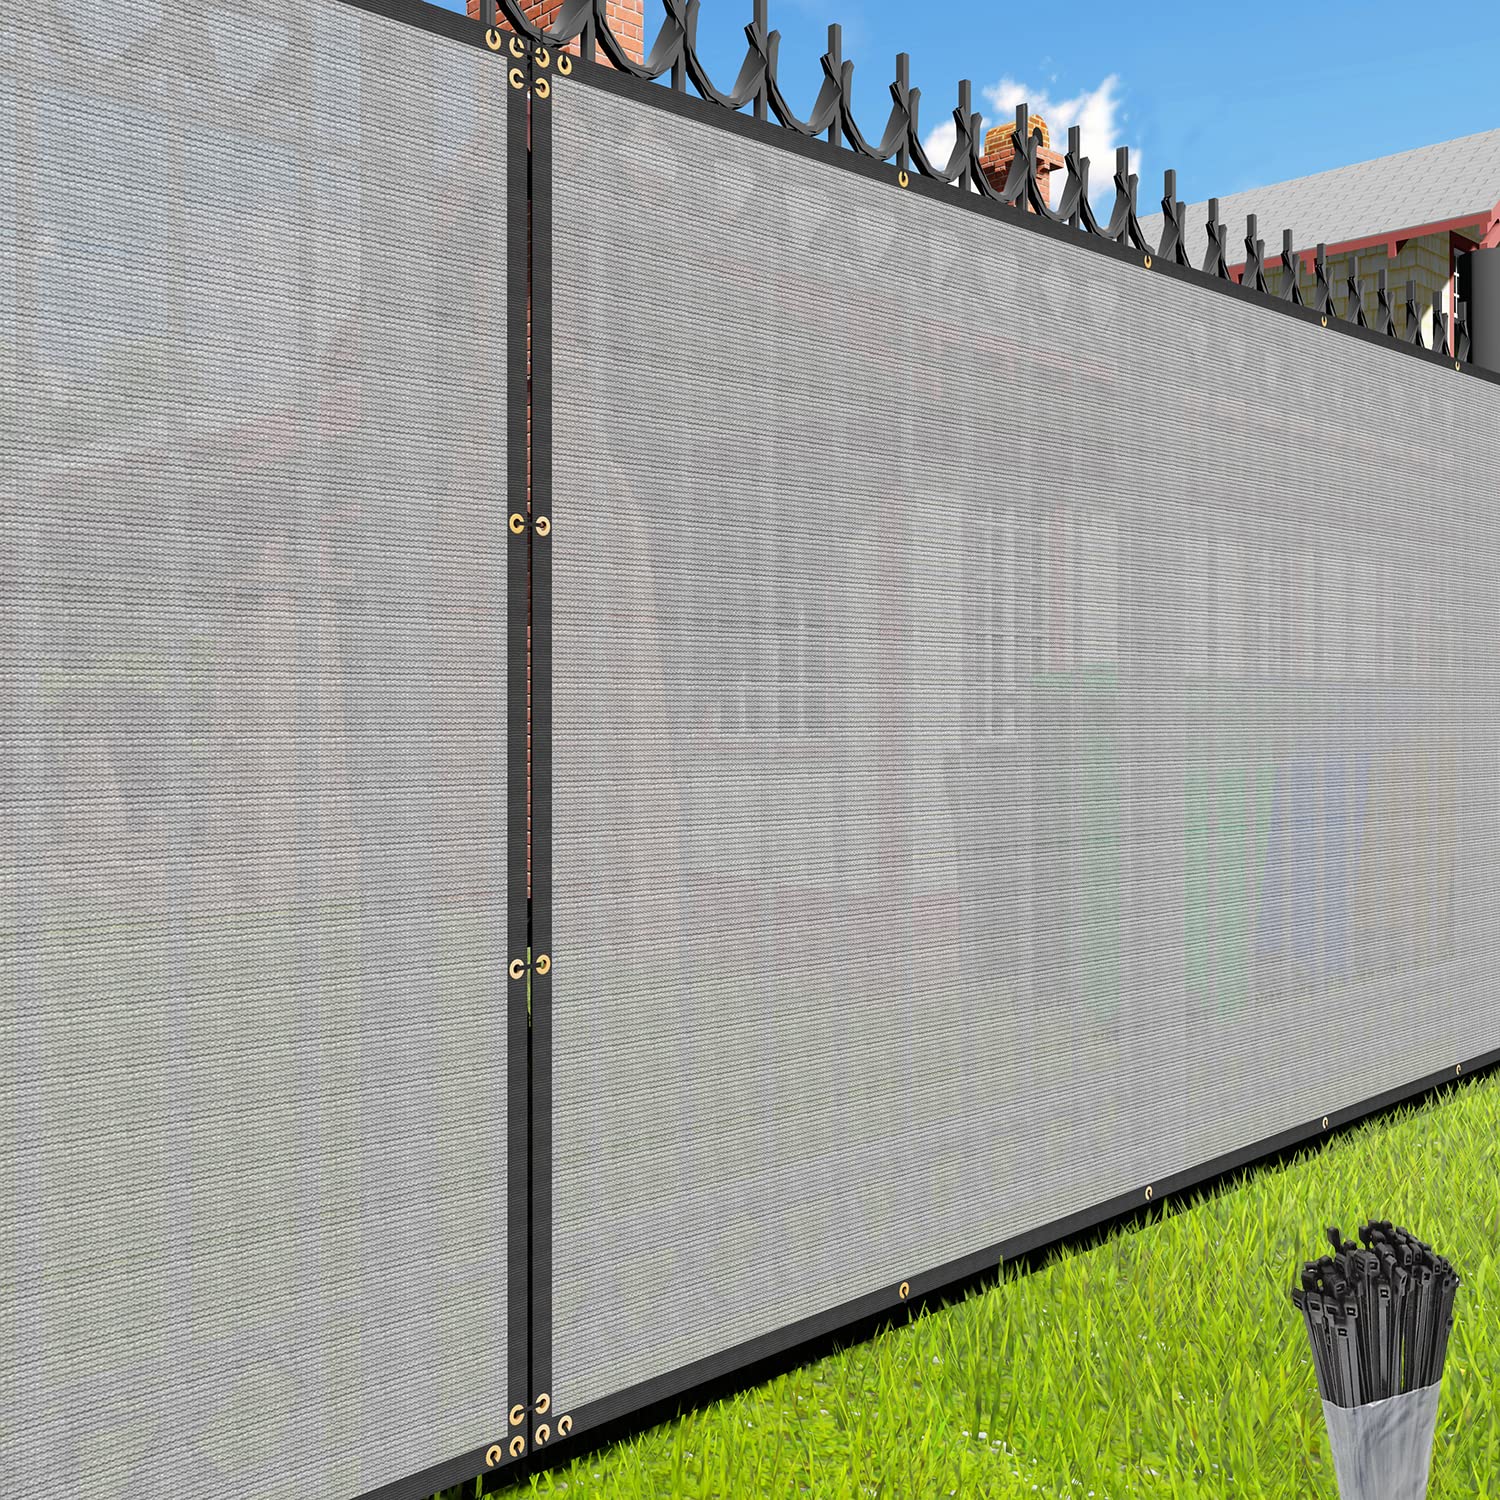 EK Sunrise 6 x 39 Privacy Fence Screen with Grommets Outdoor Windscreen Fence Covering Privacy Screen UV Blockage for Bac